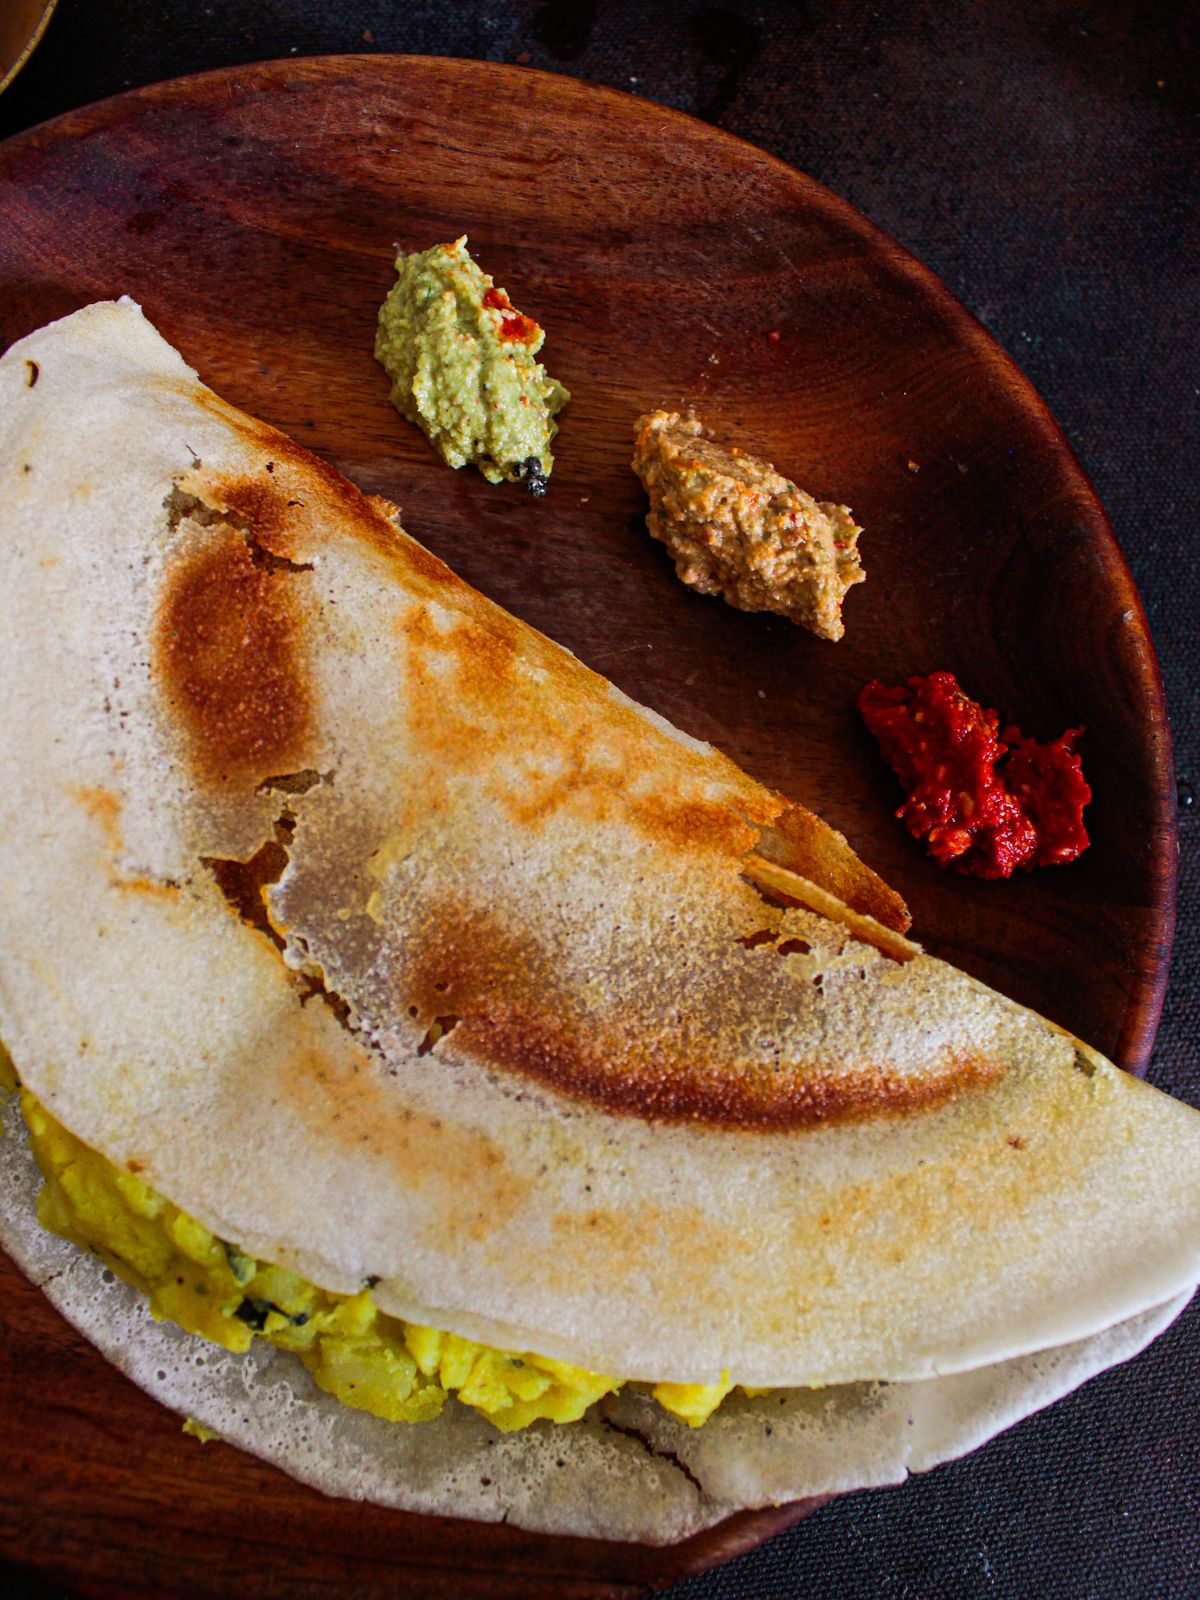 Dosa on wooden plate with chutneys on side